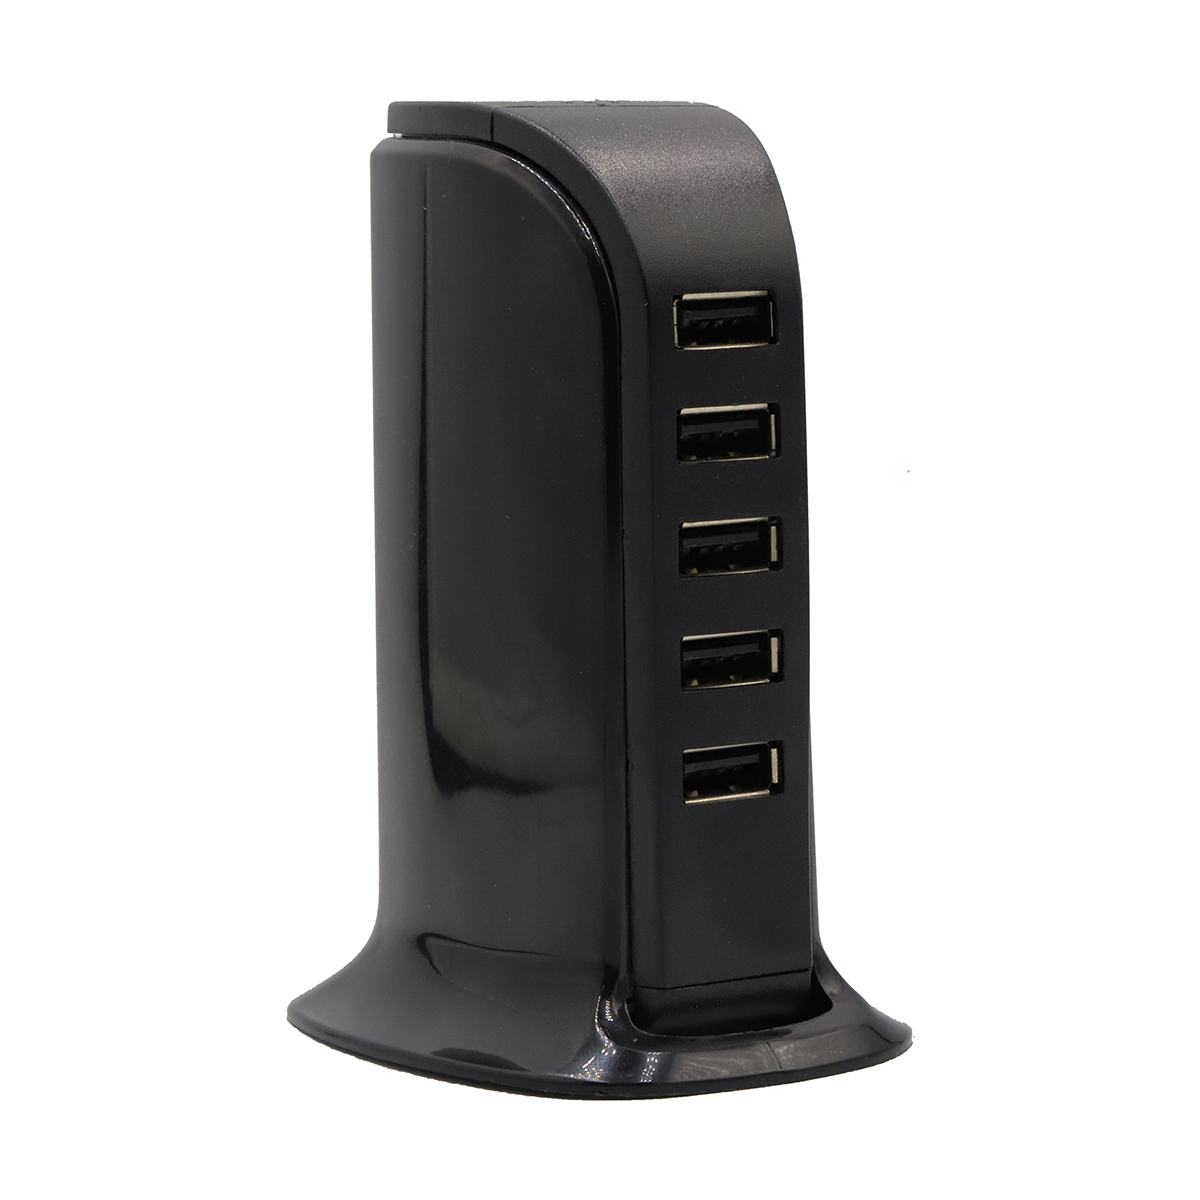 4. LM-J32 30W 5 USB Port Charger Station Bulk Purchase and Corporate purchase from China Union Power -Description-